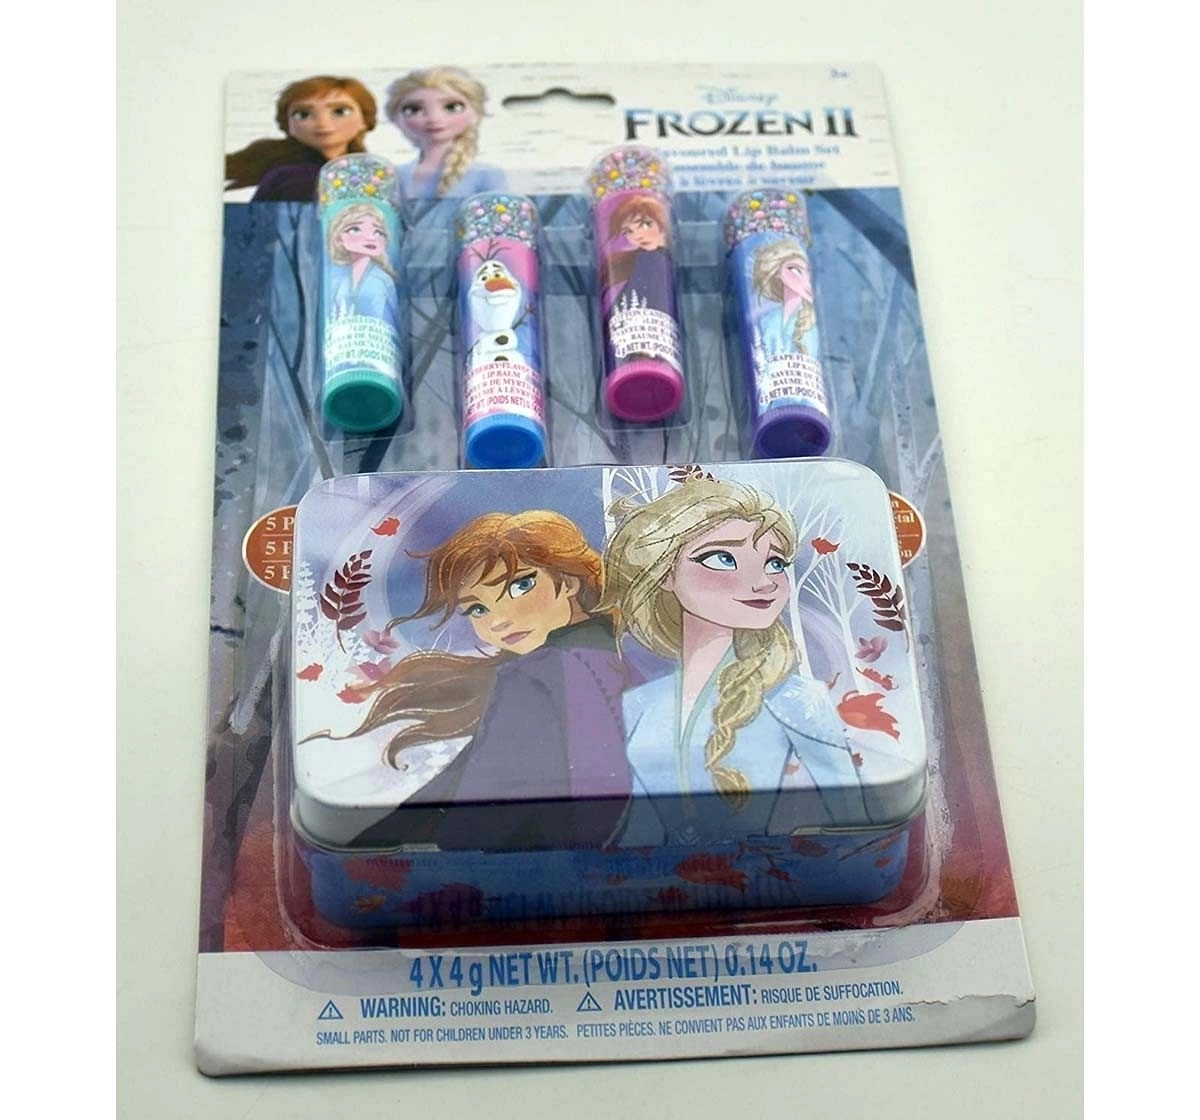 Townley Girl Frozen Ii - 18Pk Nail Polish Toileteries And Makeup for Age 3Y+